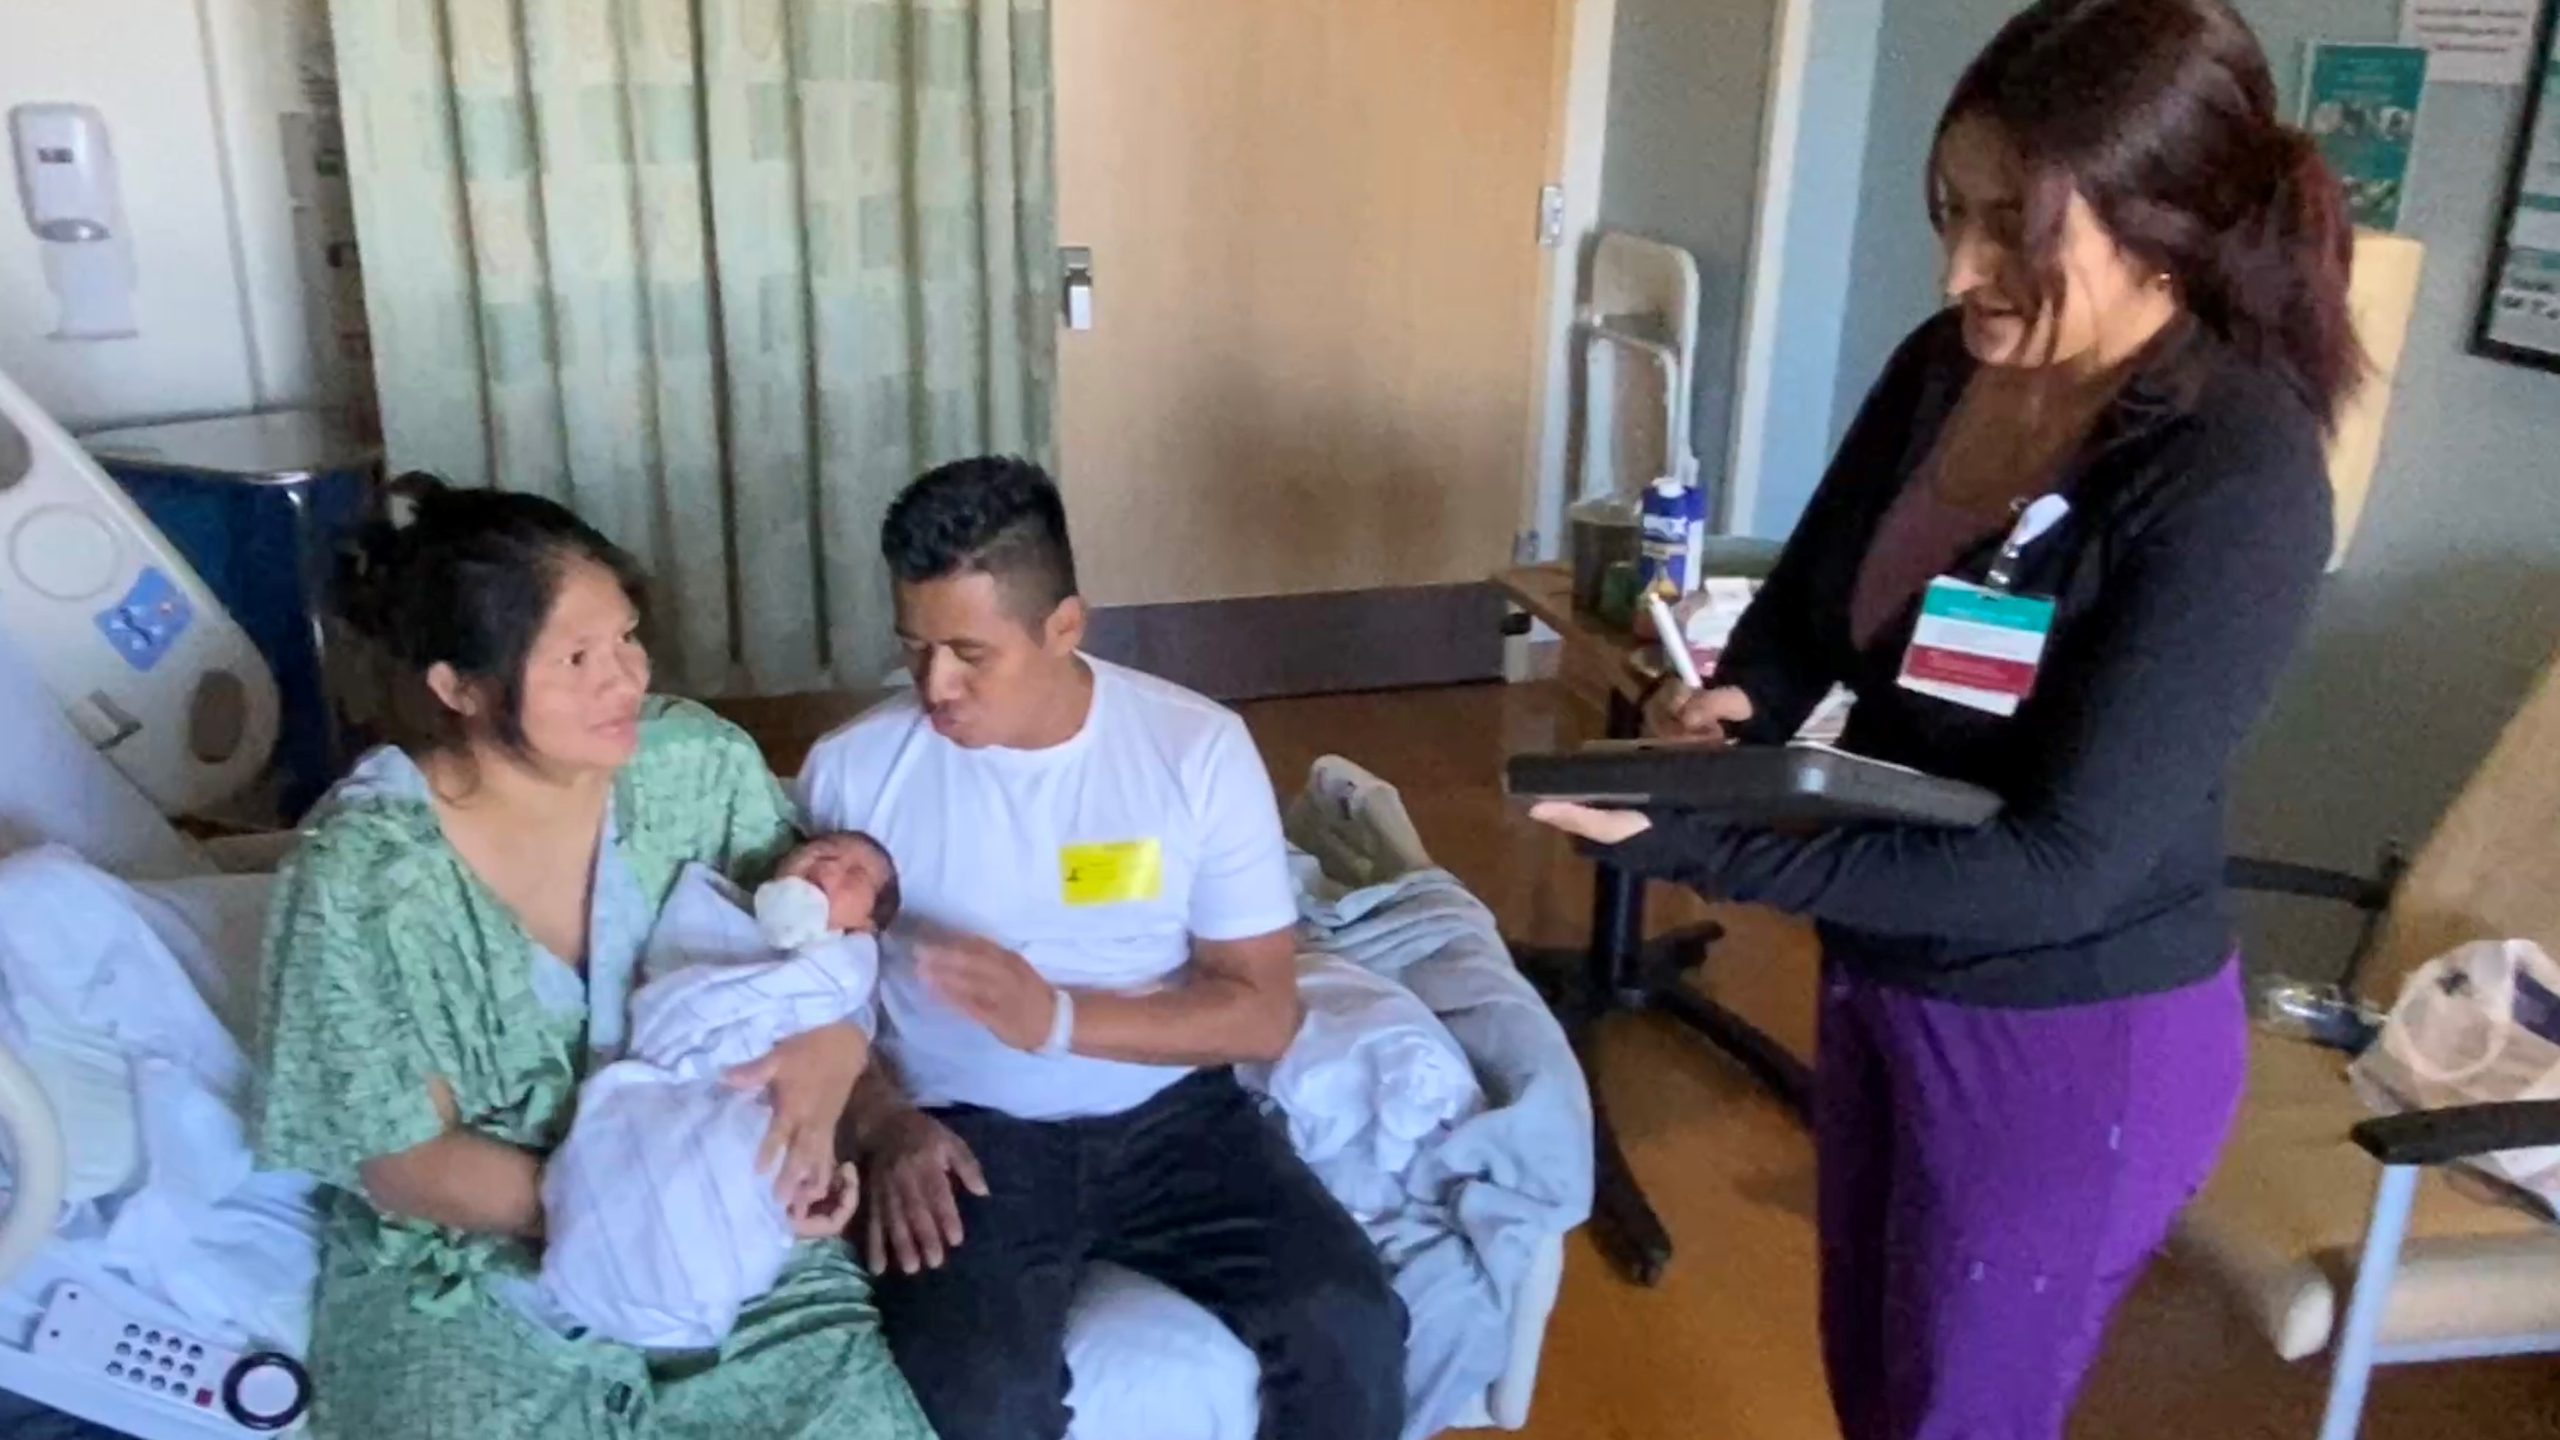 Navigator helping couple with new baby